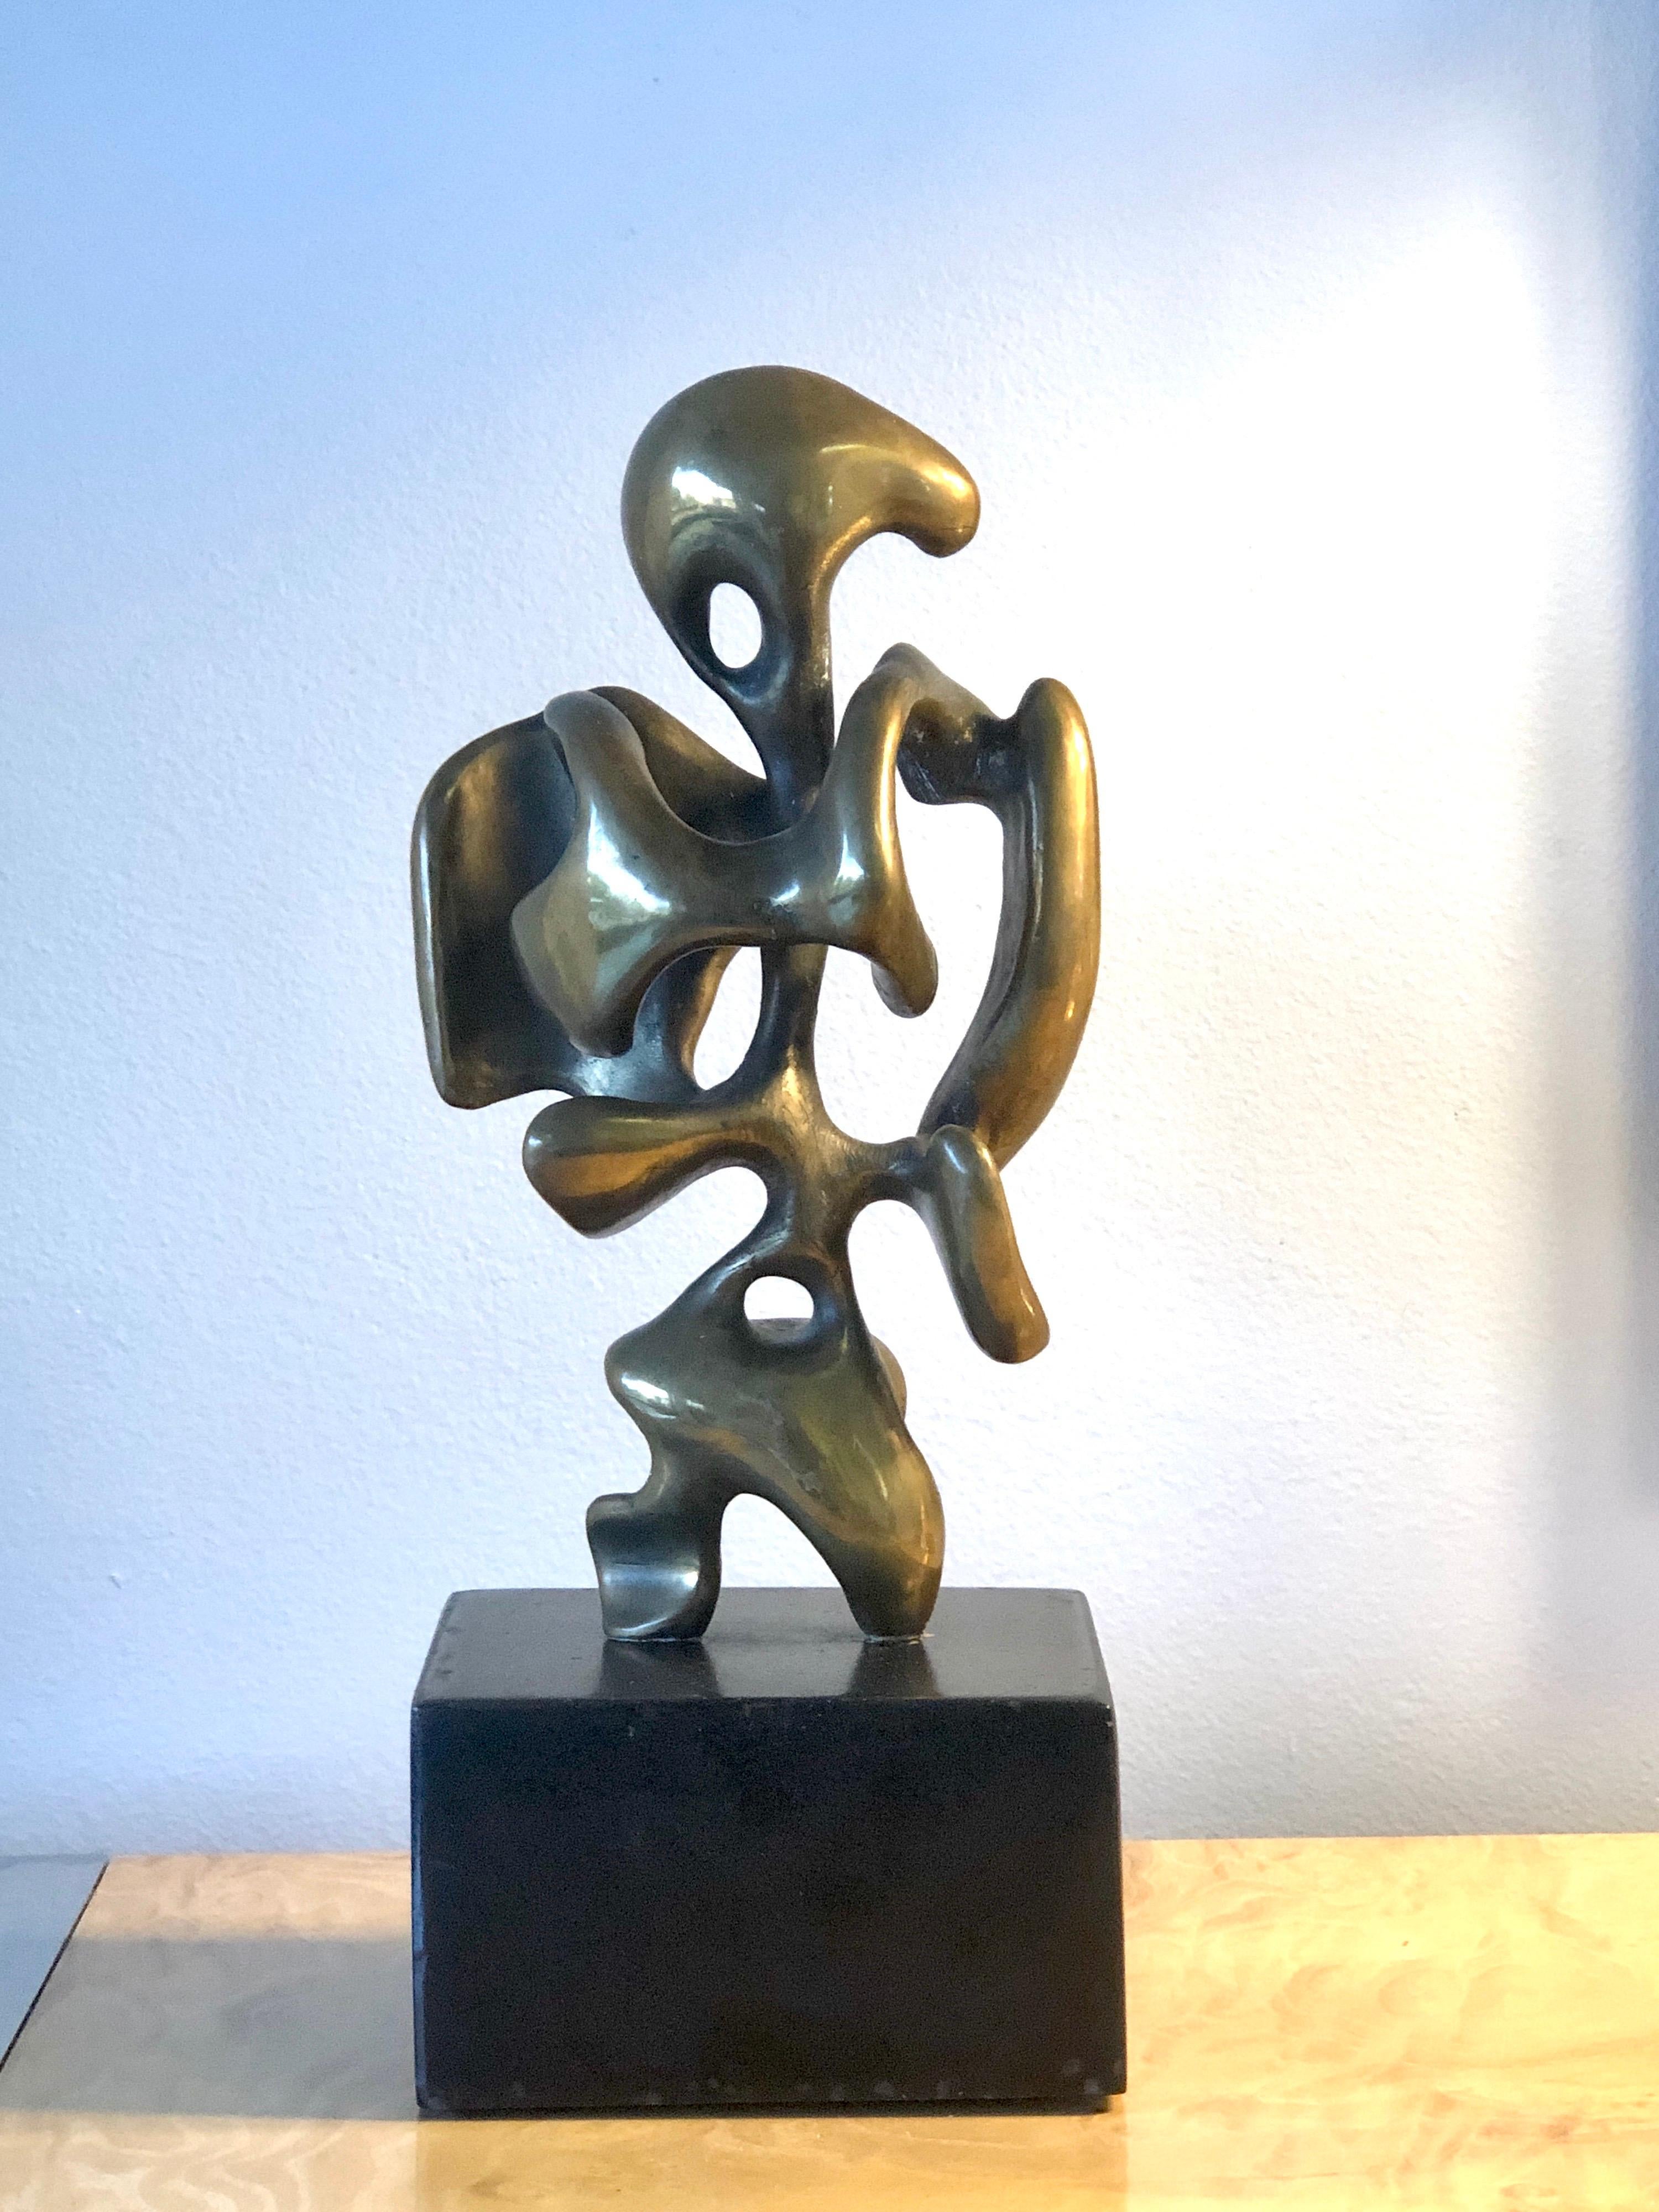 A wonderful bronze by Eli Karpel. Mounted on its original revolving base as envisioned by the artist. Signed and numbered 9 of an edition of 20.